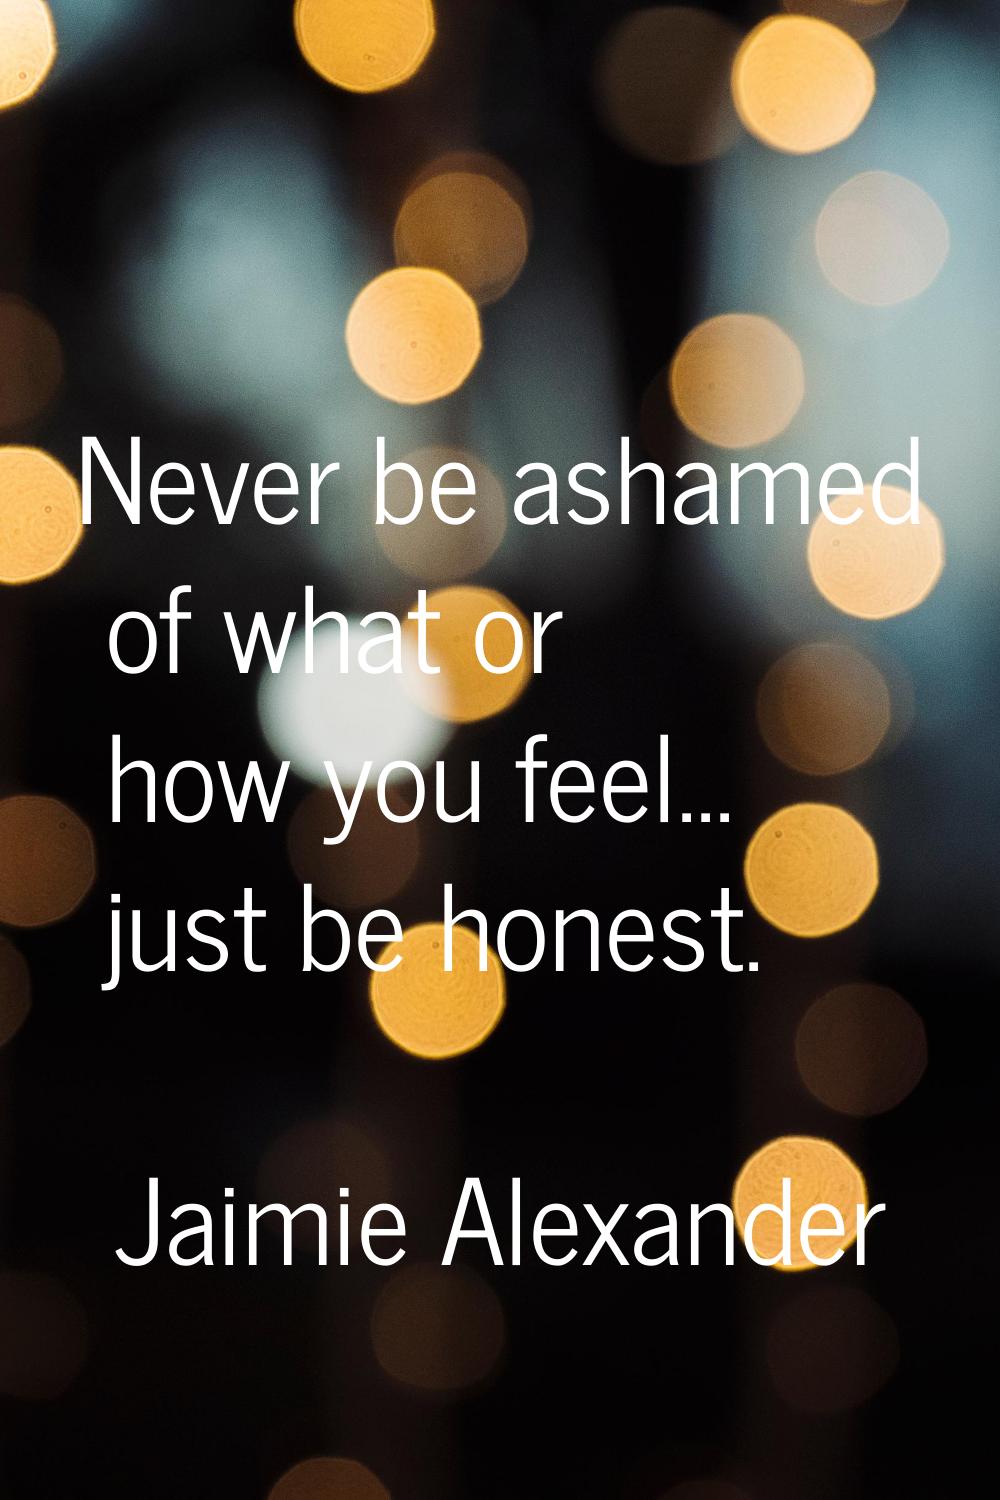 Never be ashamed of what or how you feel... just be honest.